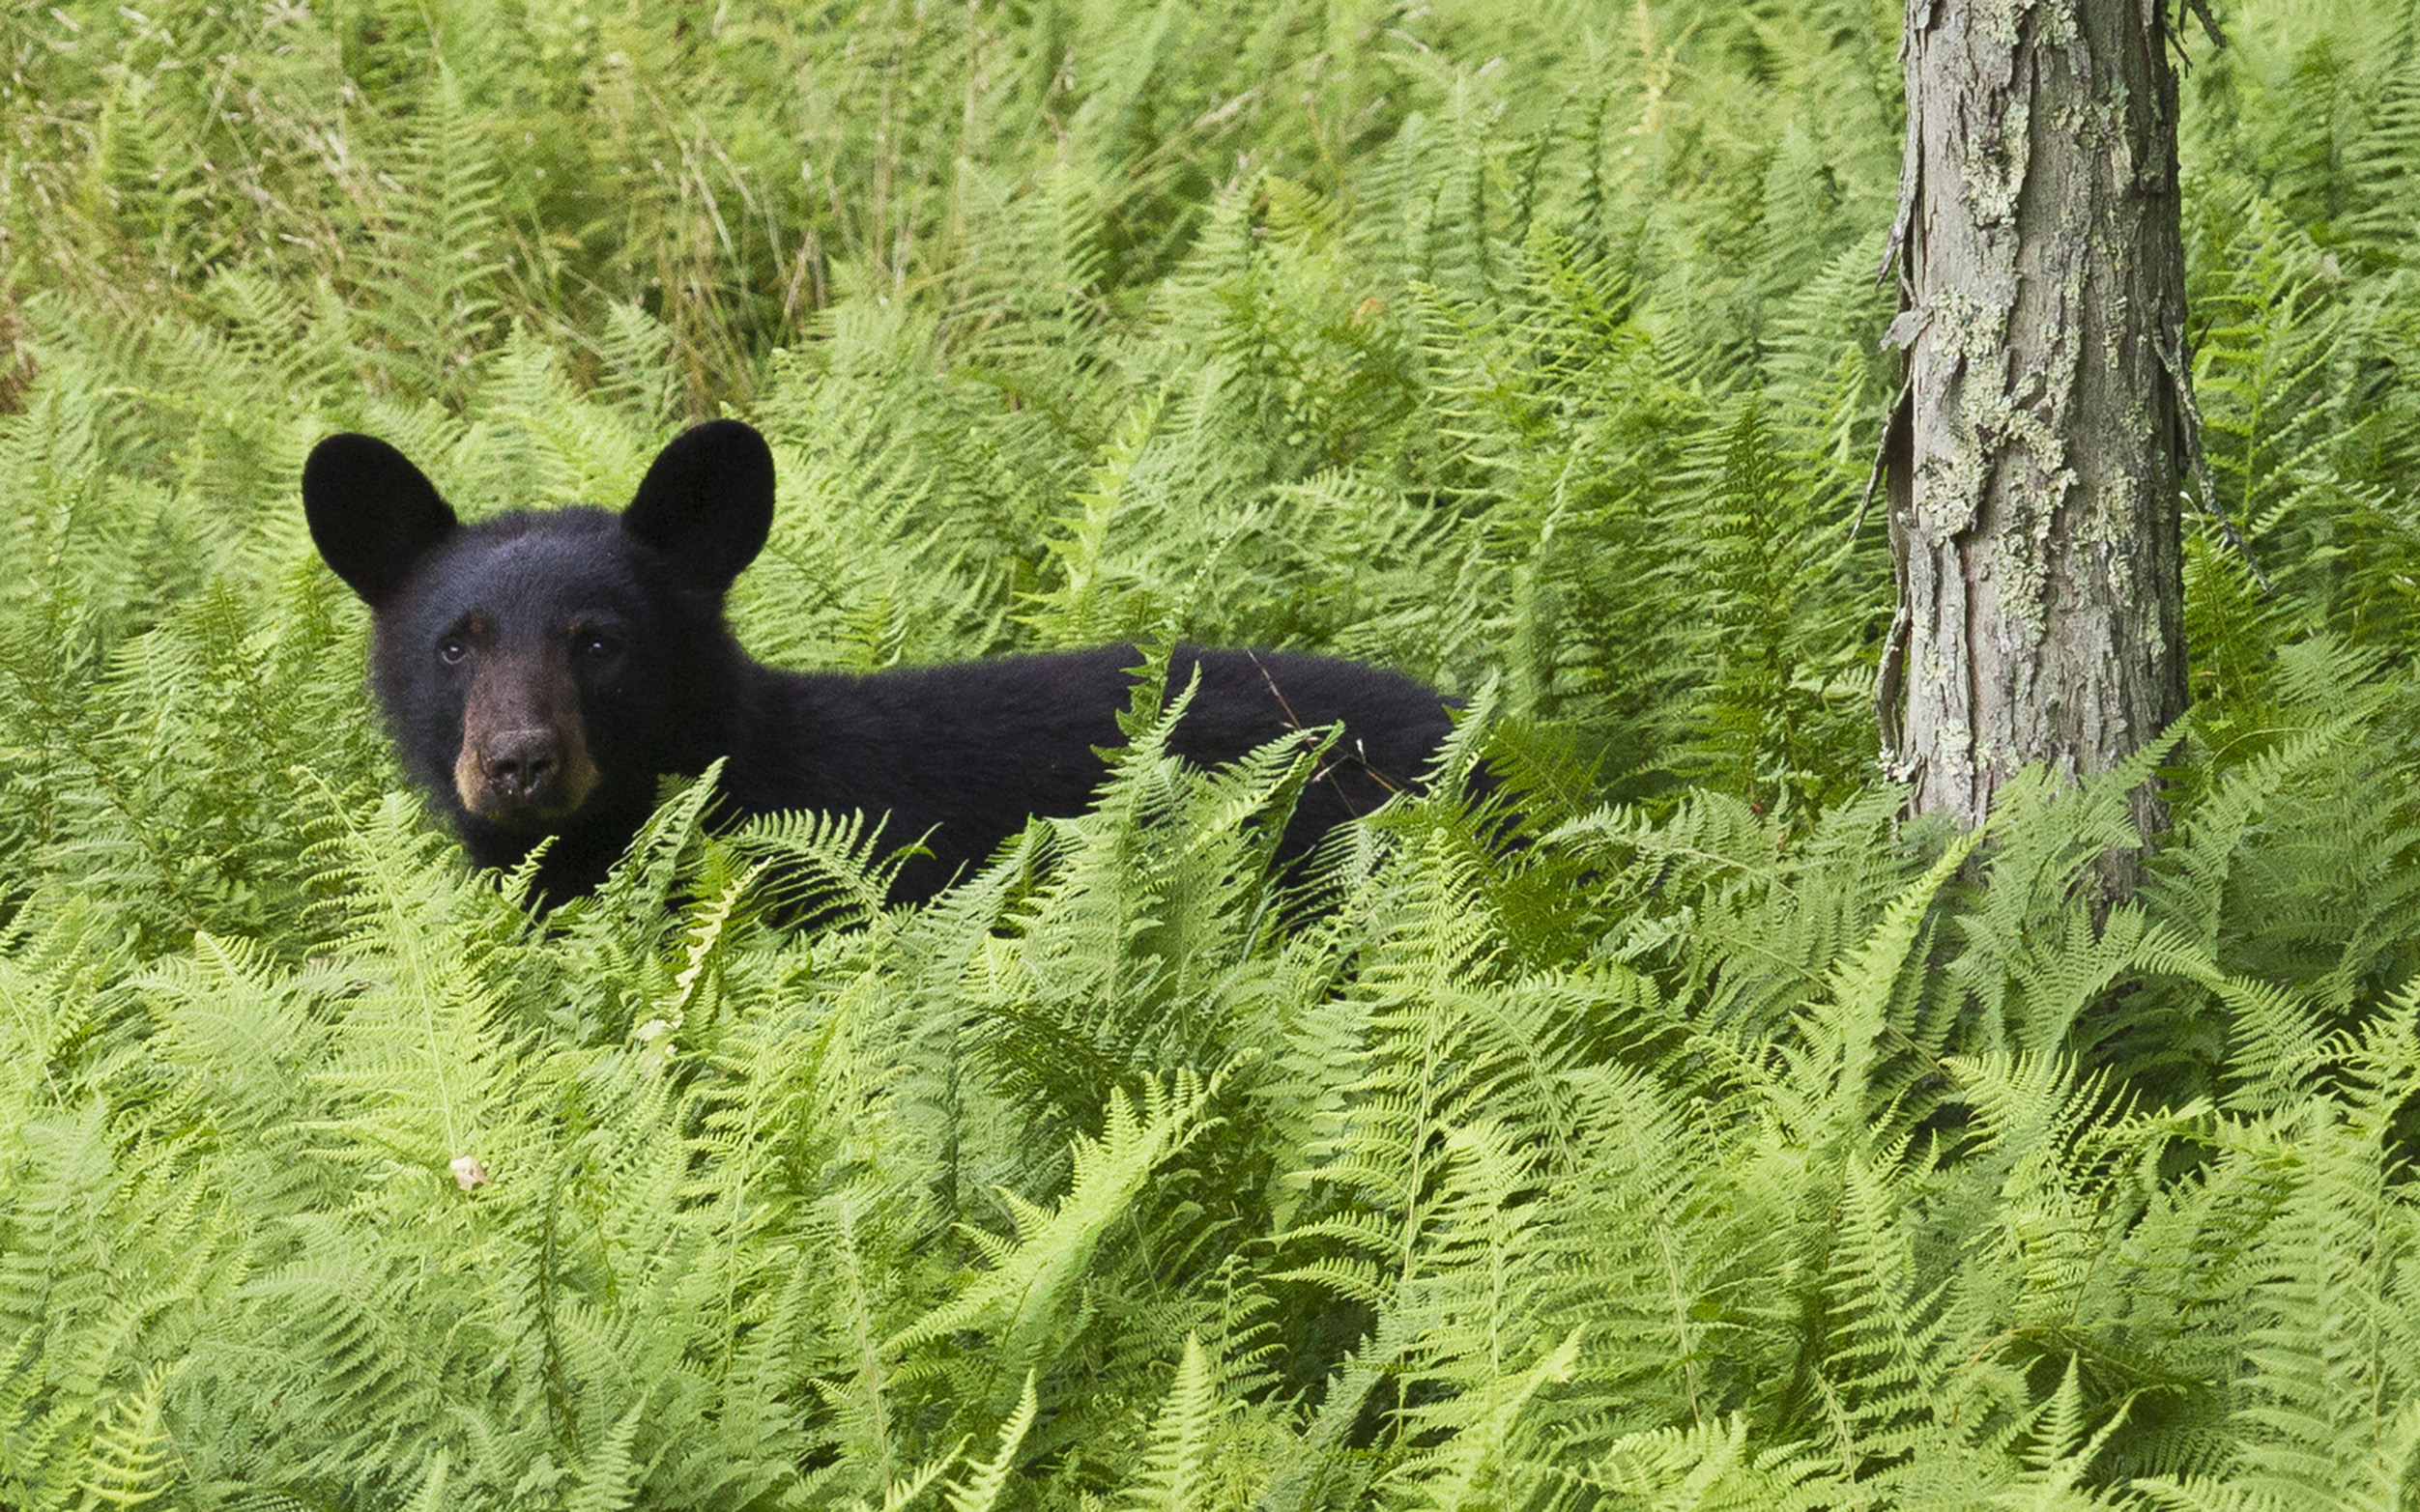 A black bear stands in a thicket of ferns.